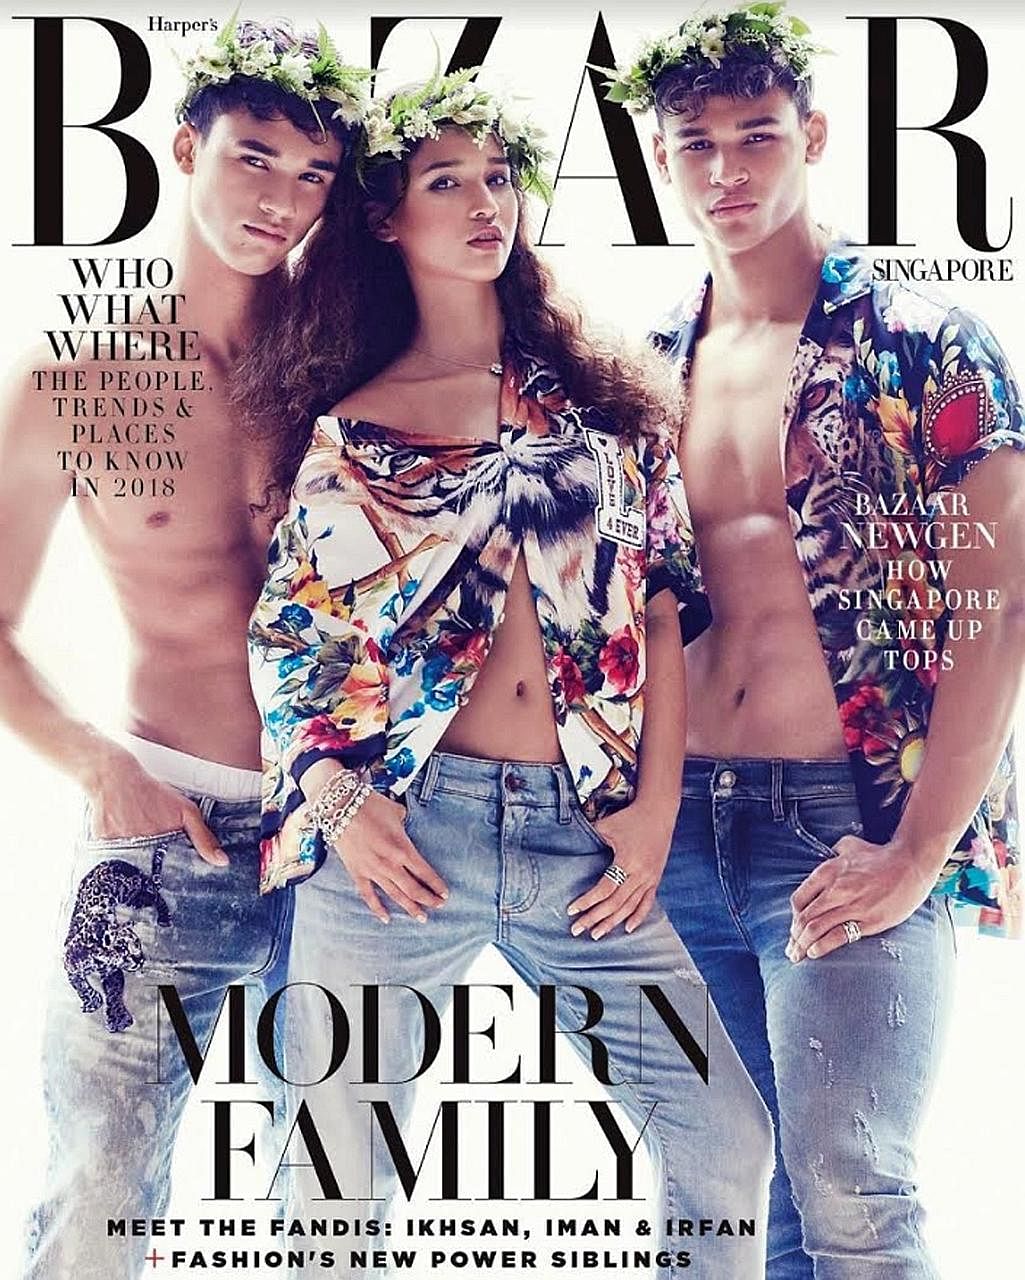 From left: Ikhsan, Iman and Irfan Fandi on the cover of the January 2018 edition of Harper's Bazaar. Fandi's sons are not just making their mark on the pitch but also in fashion.